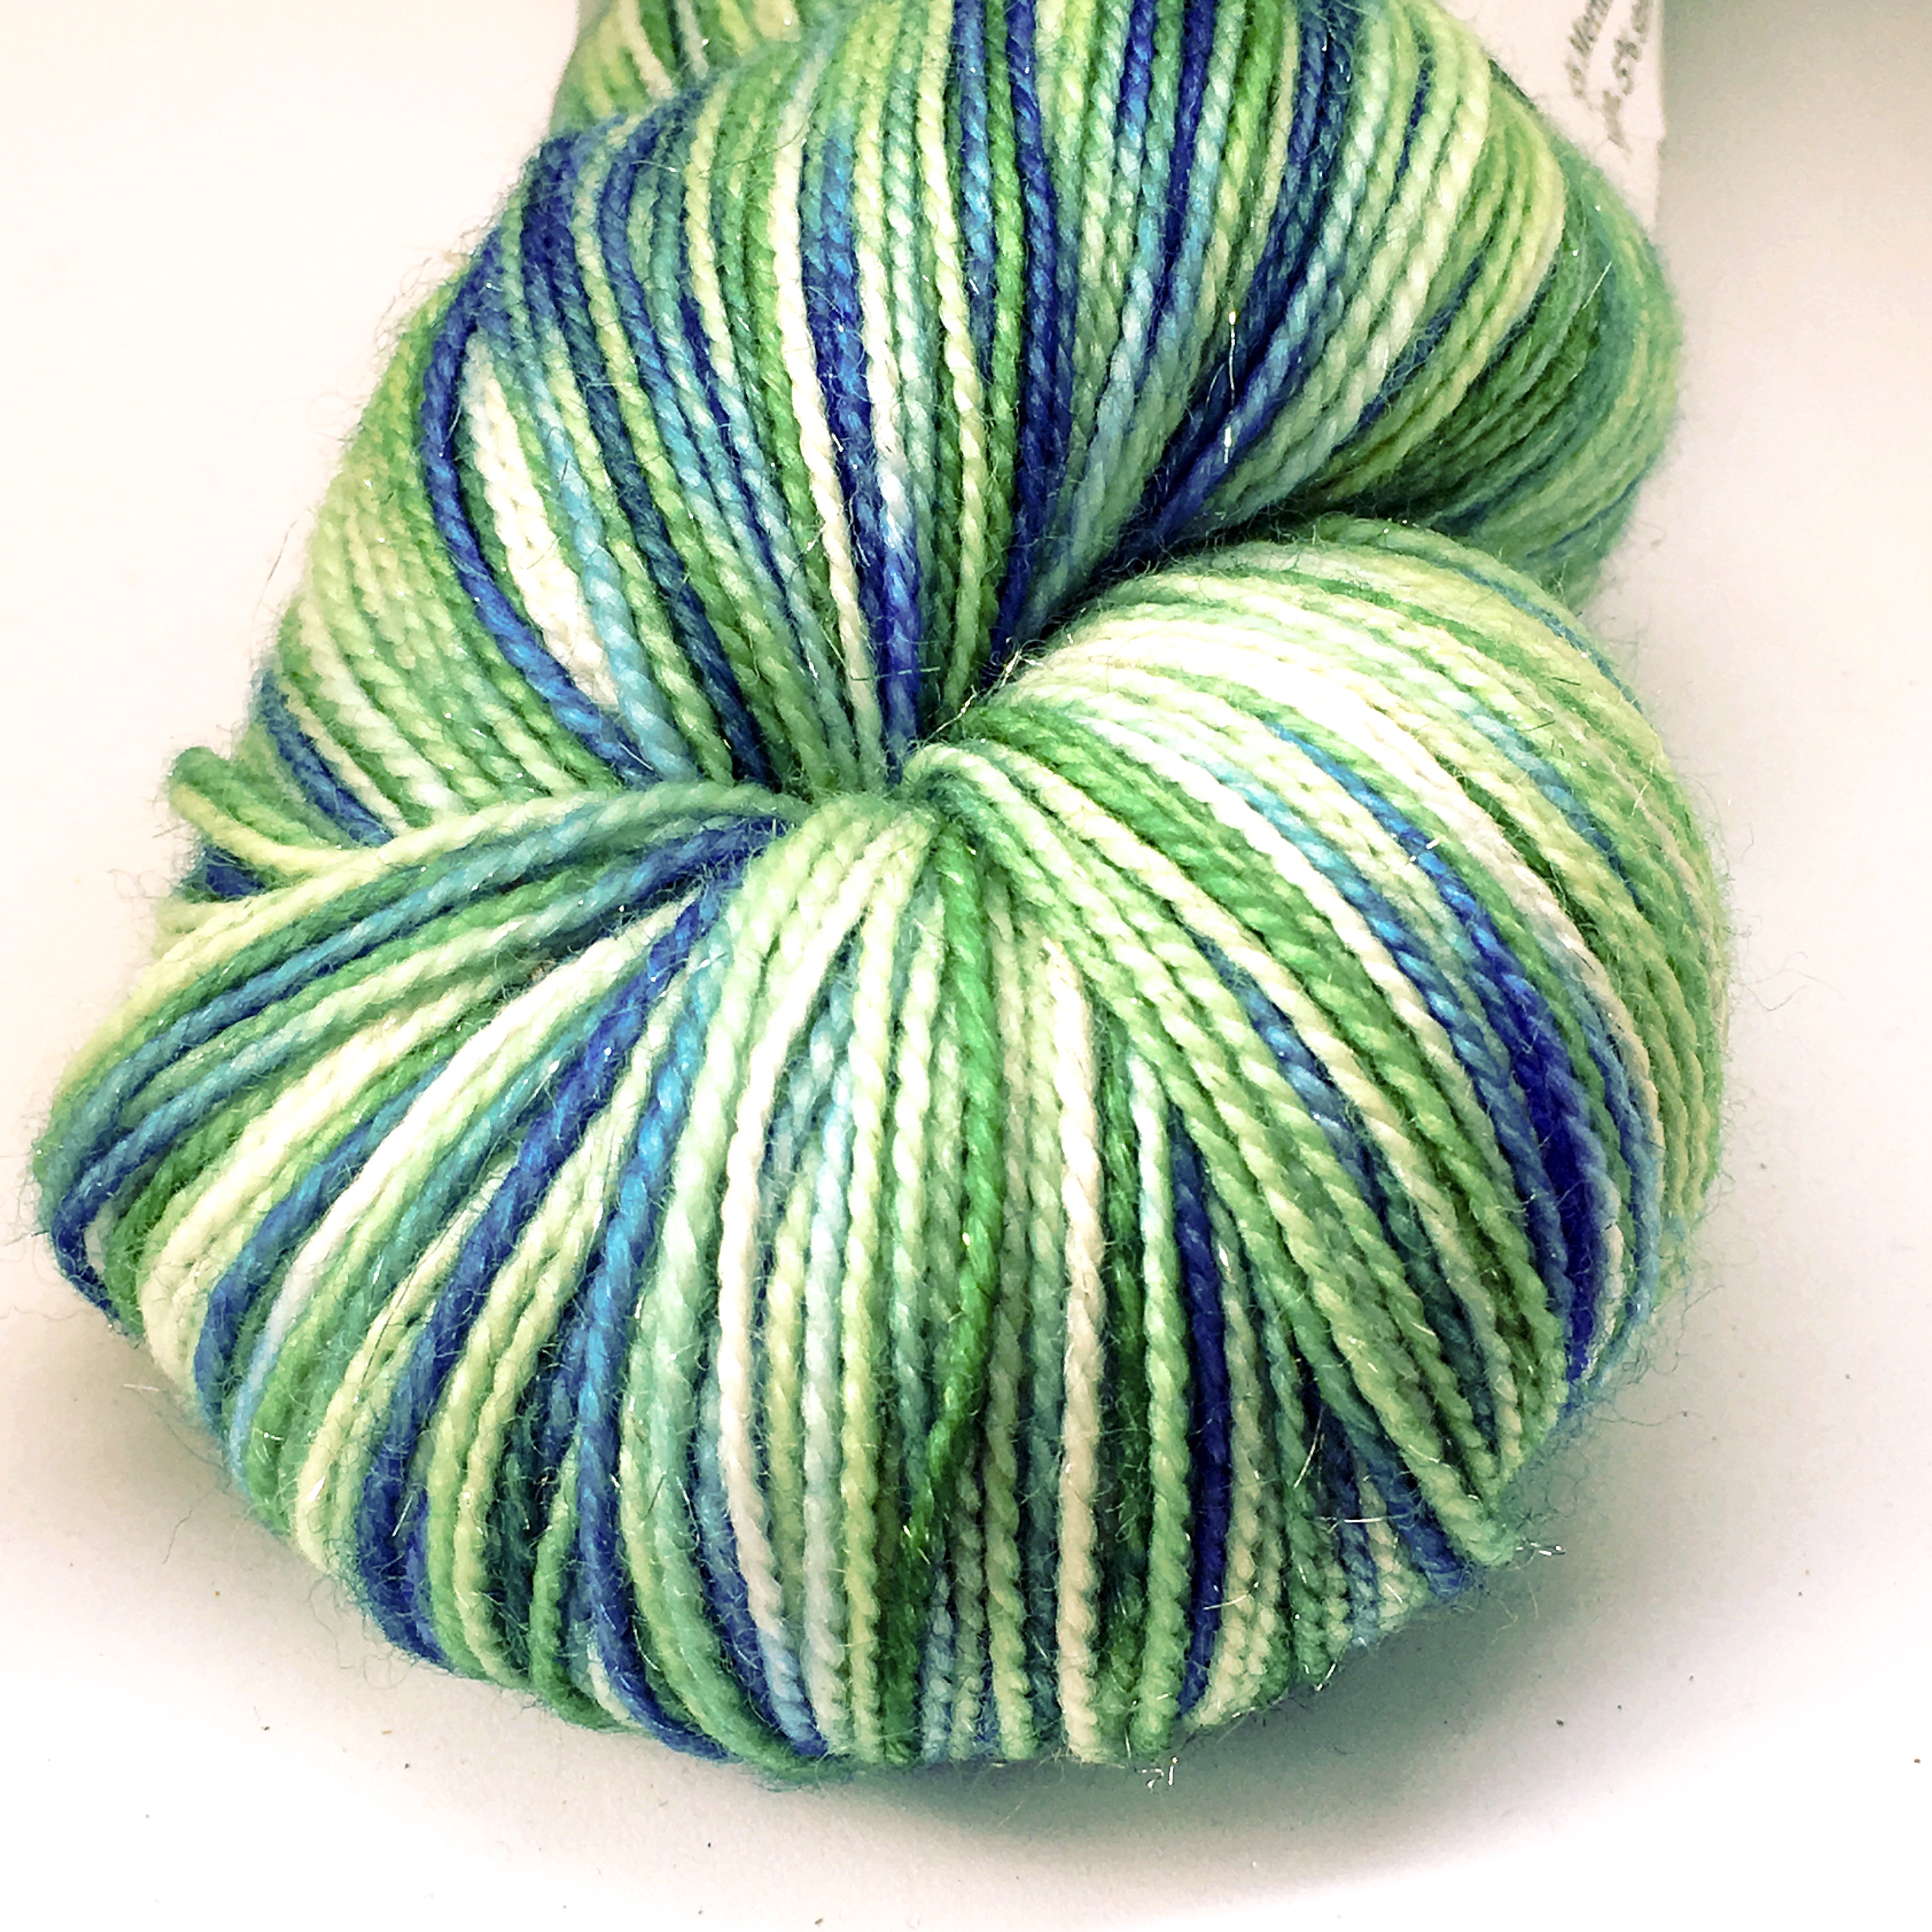 Green blue variegated sock yarn, Earth from the Air, plain or sparkly 4 ply yarn